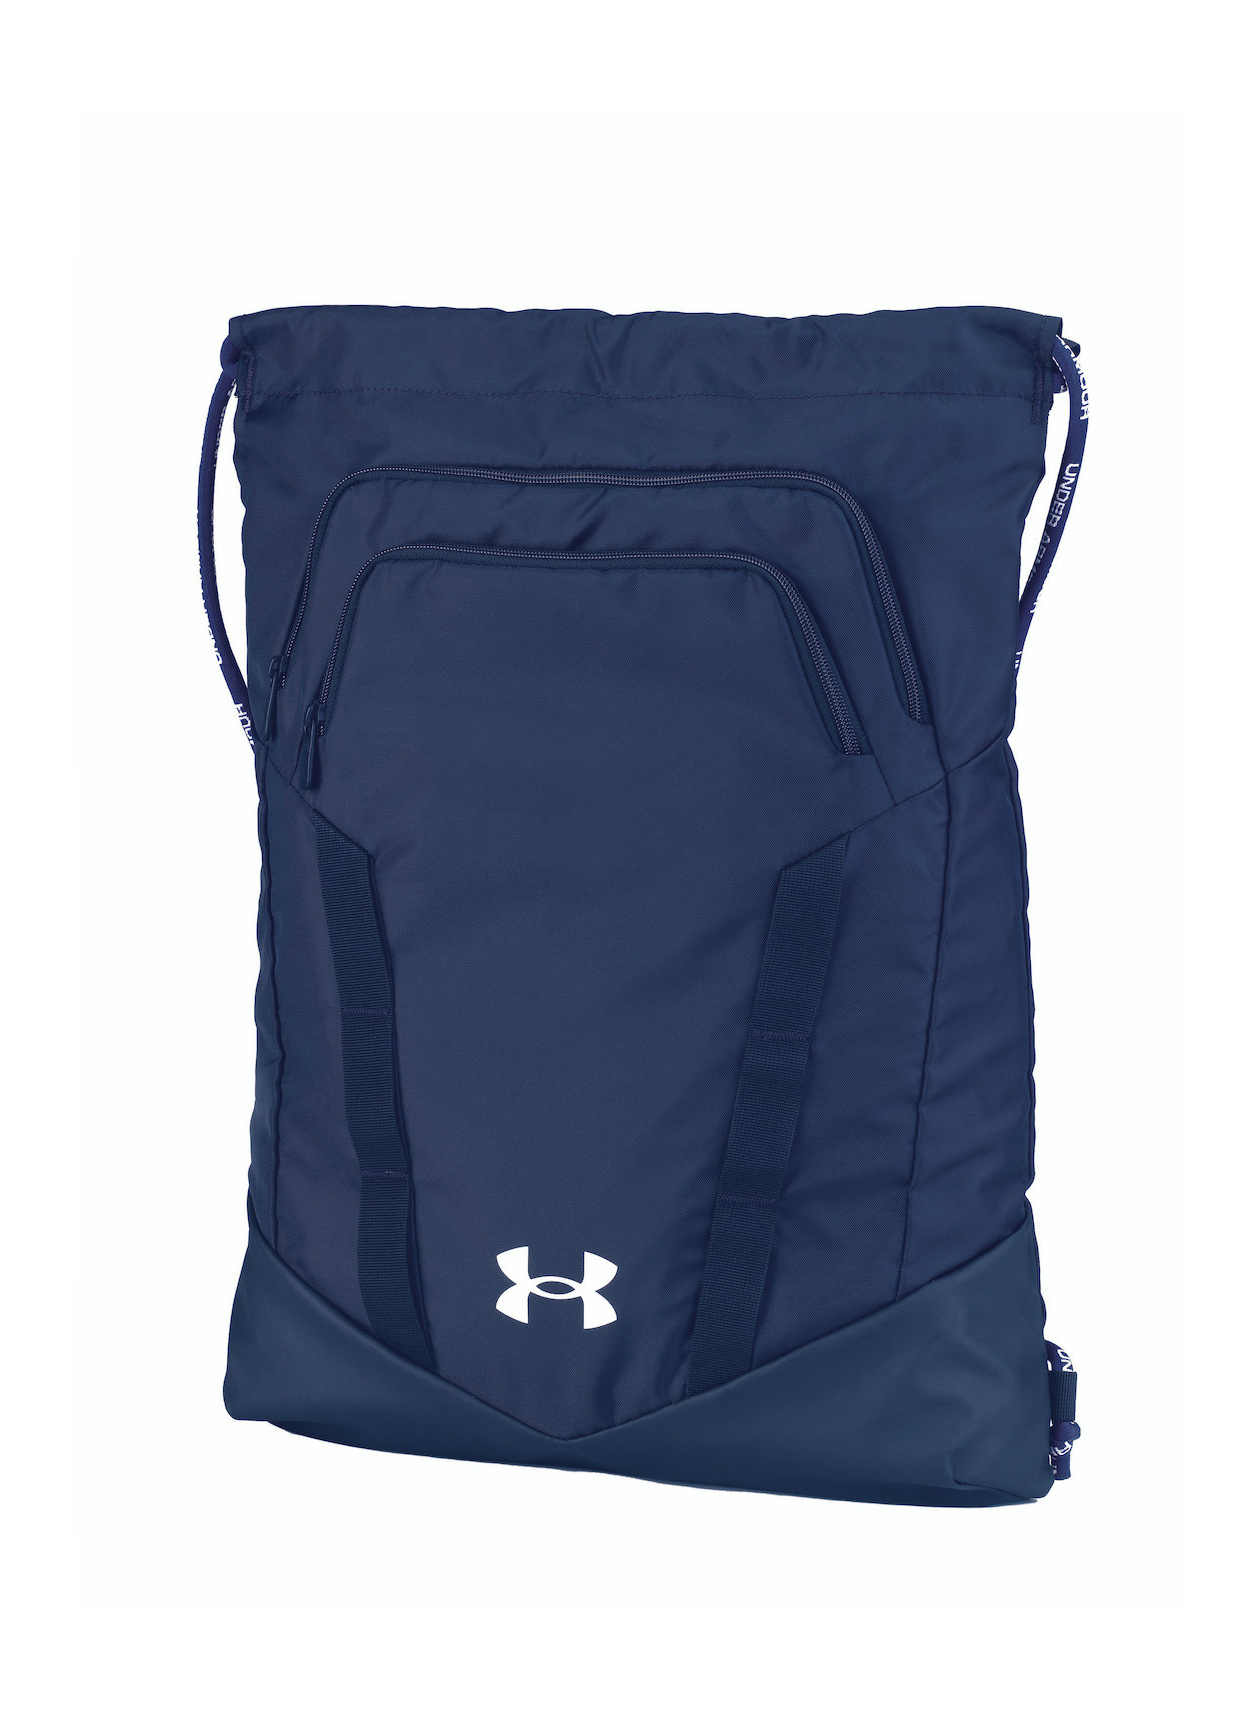 Under Armour Midnight Navy Undeniable Sackpack 2.0